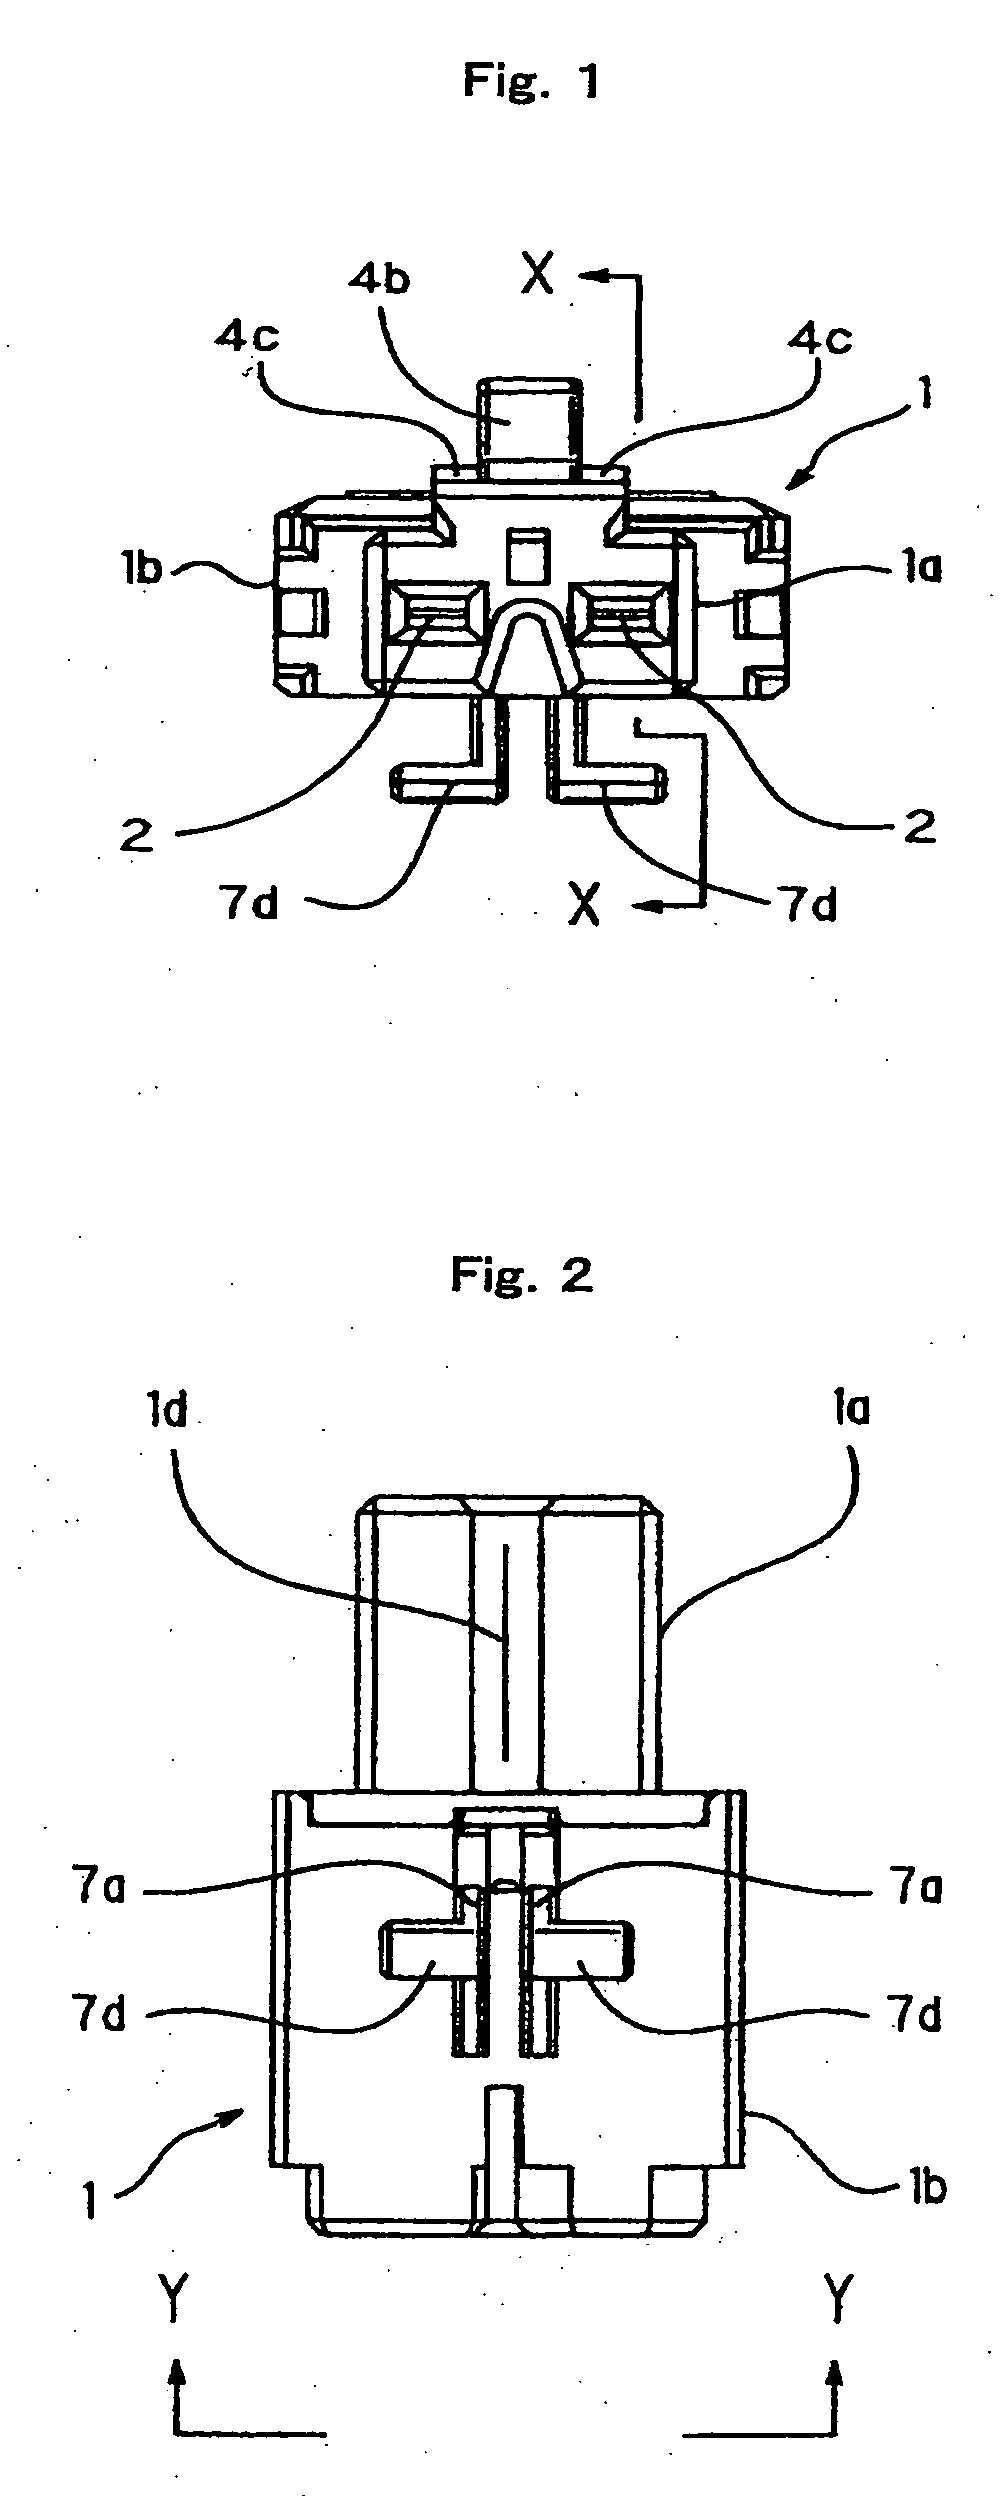 Speaker Cable Plug and Speaker Terminal for Receiving Such Plug, and Speaker Terminal System Using Such Plug and Terminal